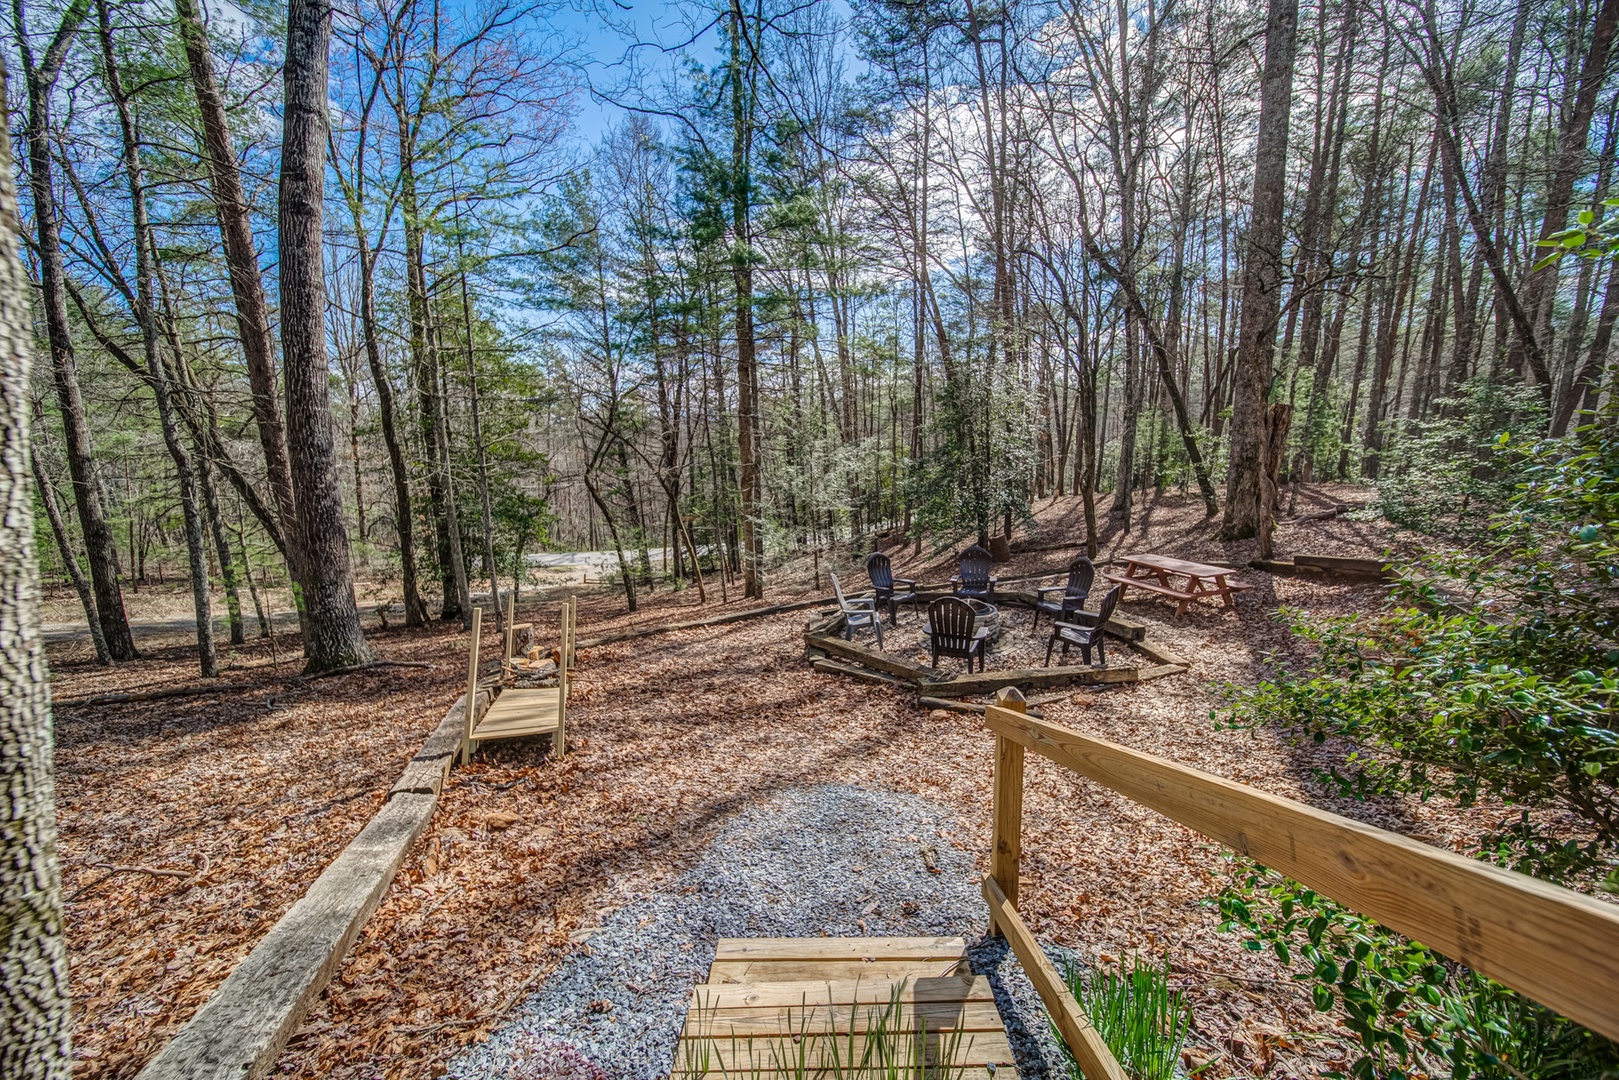 Escape from it all down a wooded pathway to the Firepit area